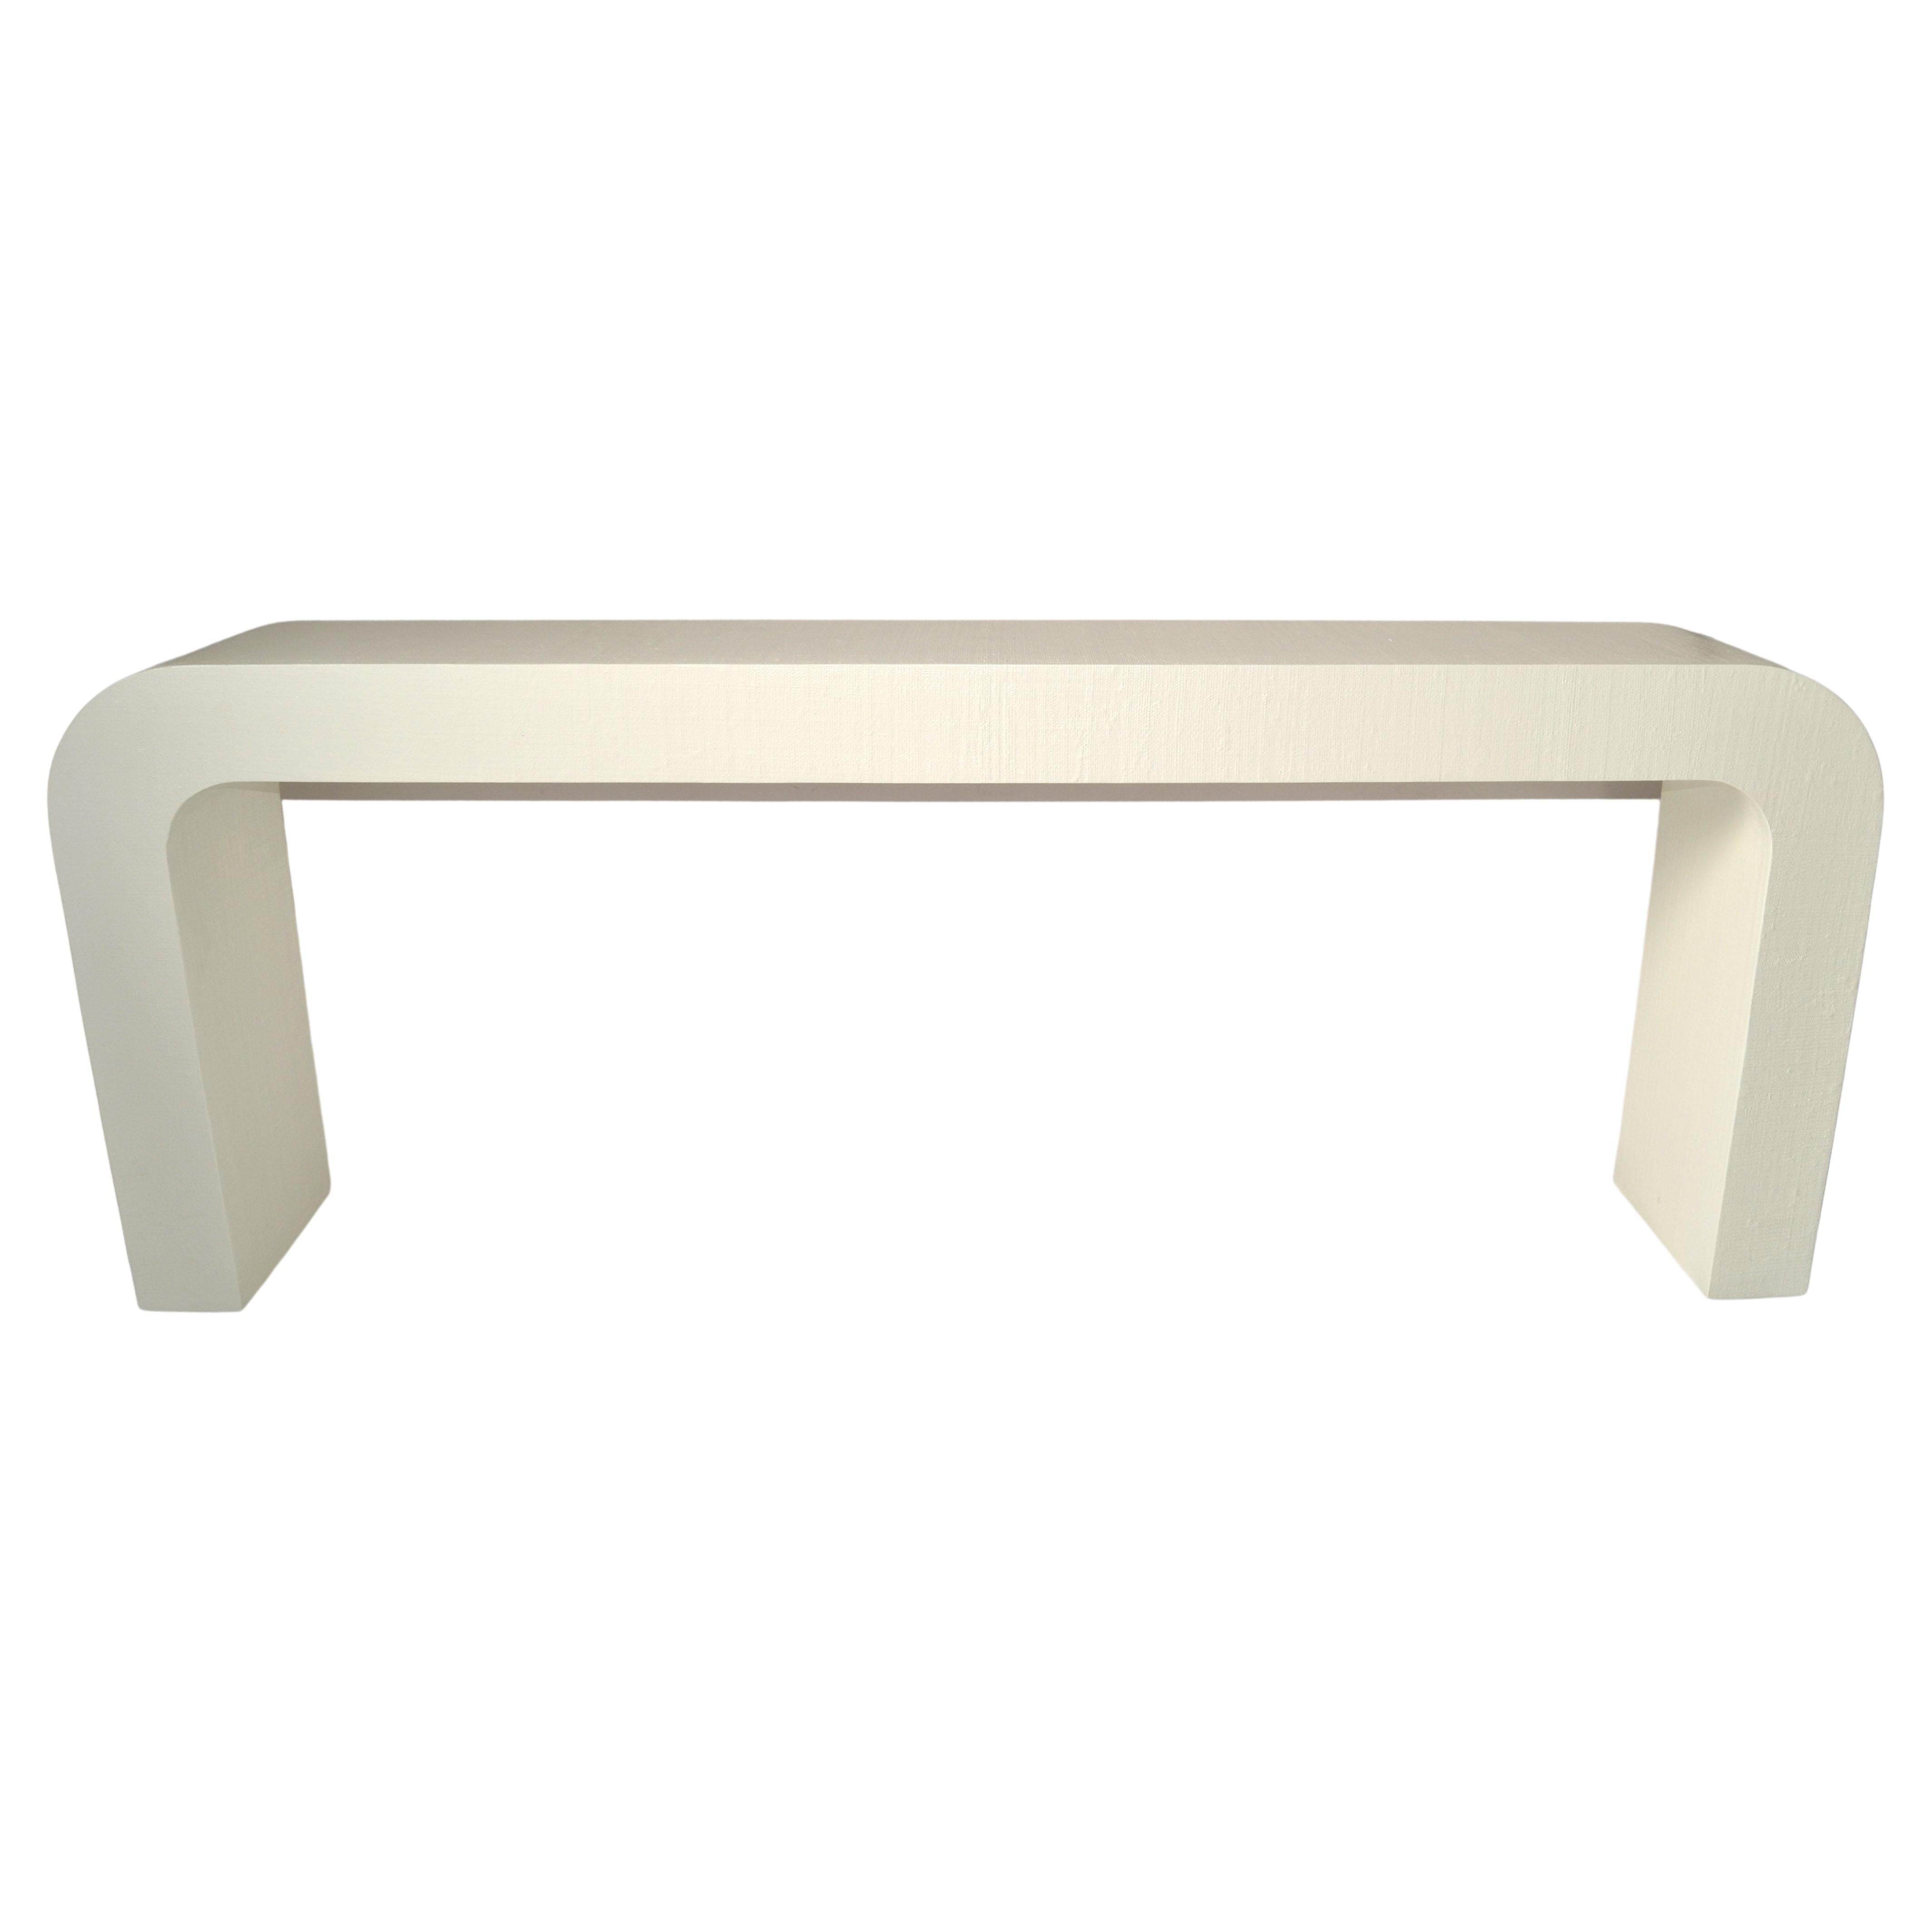 Karl Springer Style Mid-Century Modern Textured Console Table, 1980 For Sale